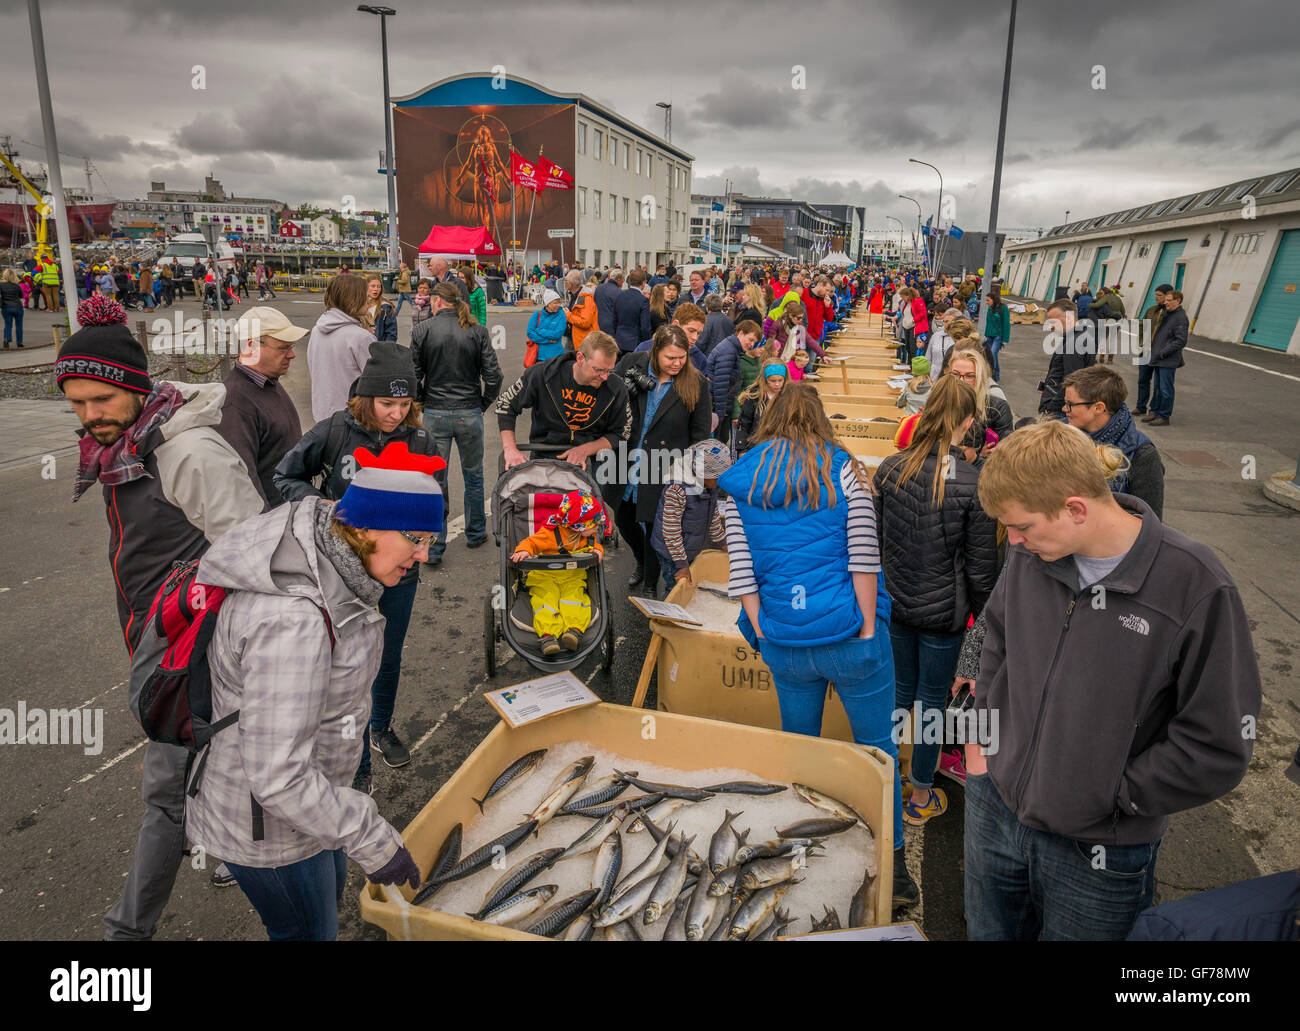 People looking at Fish at The Annual Seaman's Festival, Reykjavik, Iceland Stock Photo